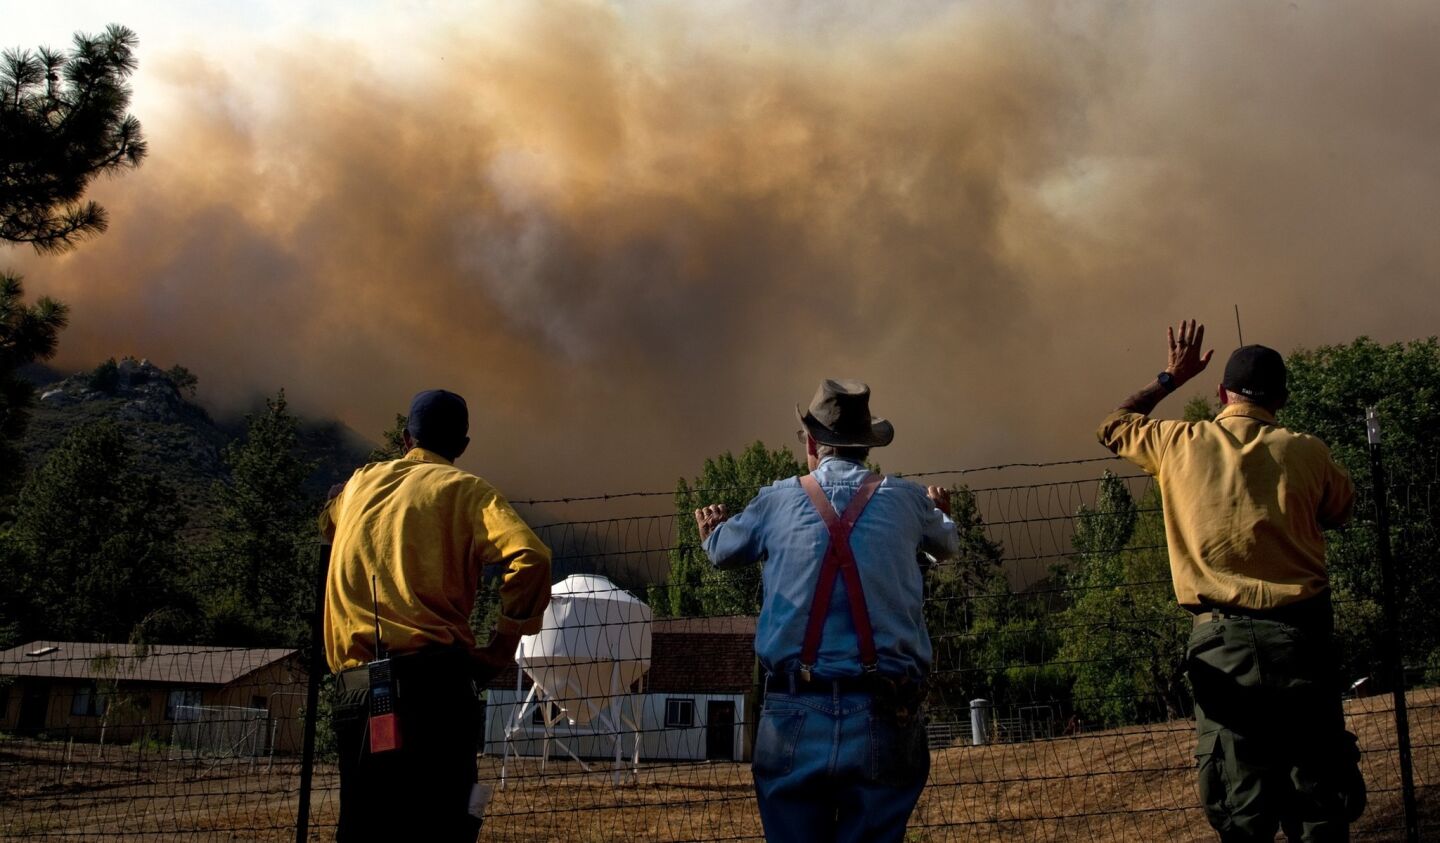 Resident Art Jaenke of Garner Valley, middle, watches the approaching Mountain fire with U.S. Forest Service firefighters Matt Boss, left, and Josh Richardson, near Highway 74 on July 17. Residents were told to evacuate, but Jaenke stayed behind to protect his property.